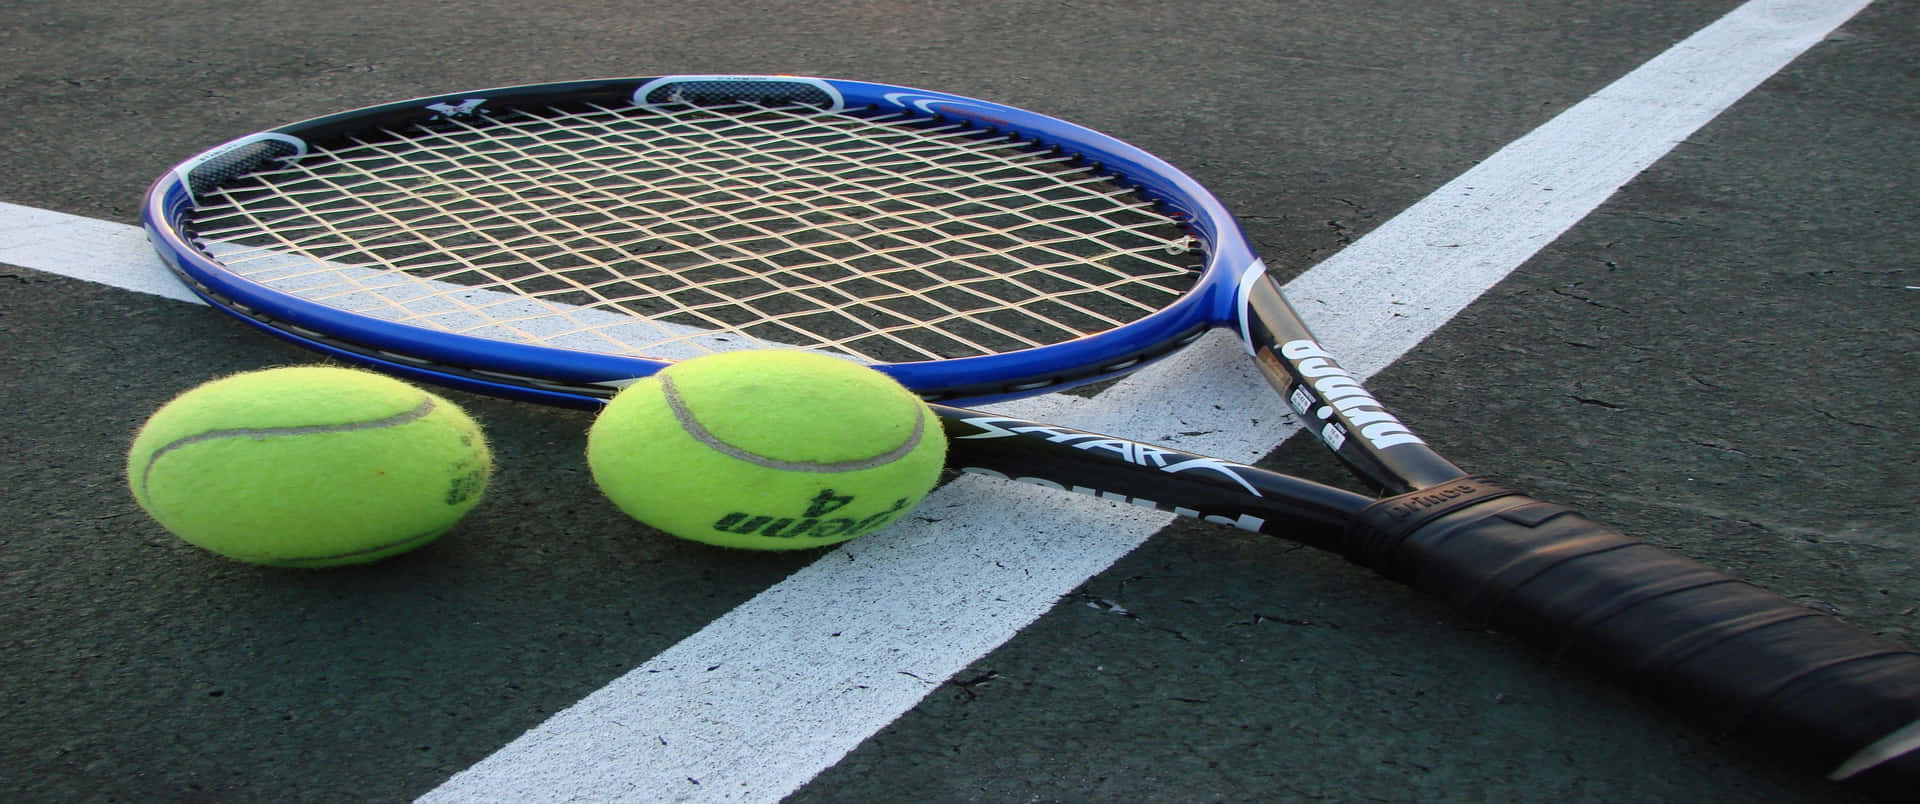 Enjoy the Sensation of a Perfectly Played Tennis Match in High Resolution